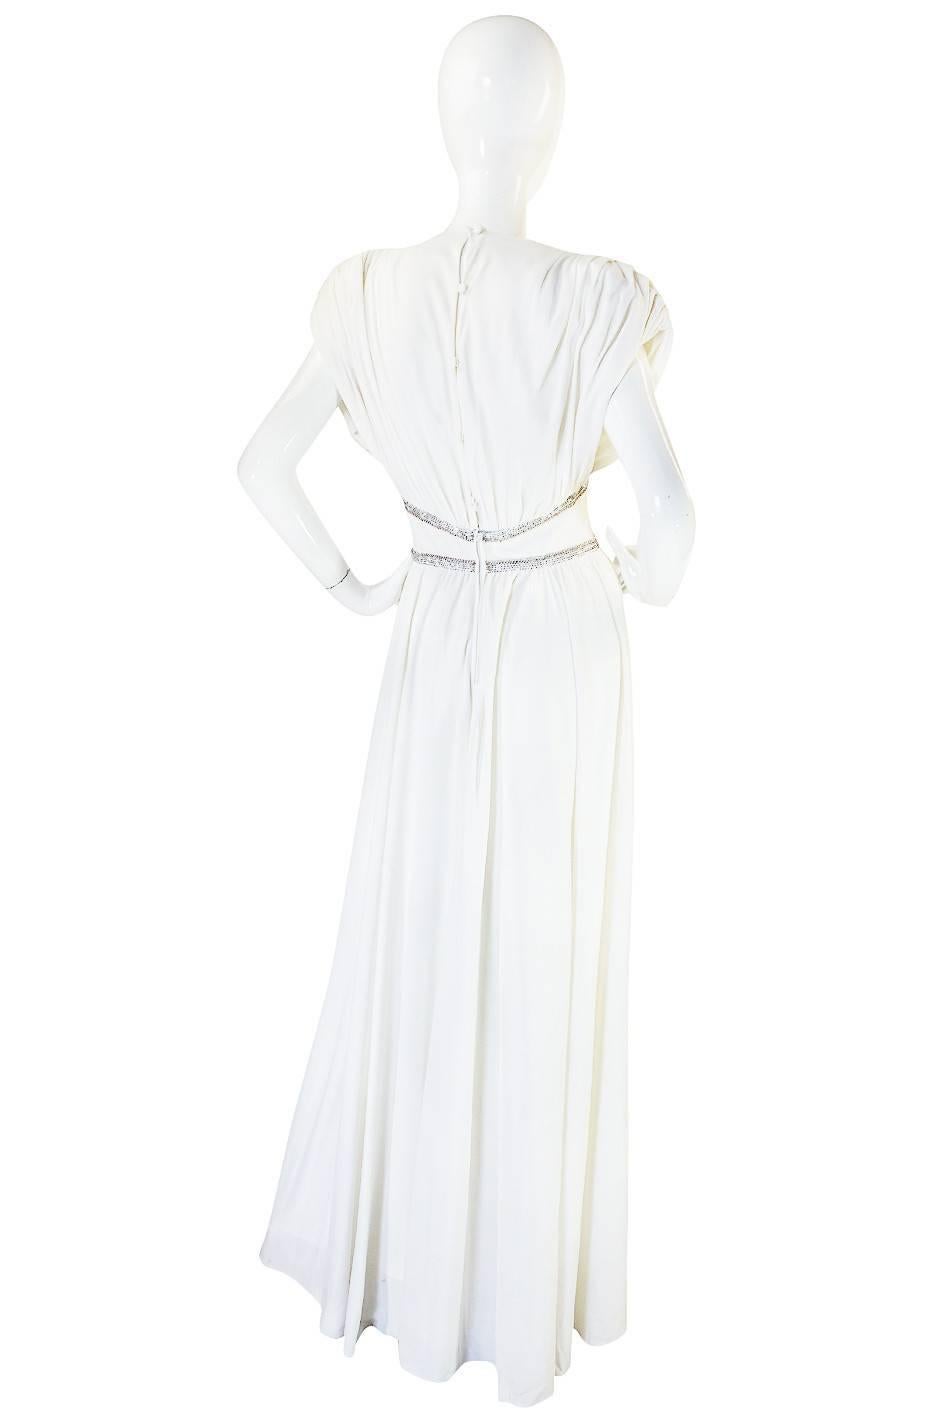 Supermodel length and made of yards and yards of a fabulous white jersey that drapes and moves divinely, this Frank Usher dress will make you feel like a Grecian Goddess. Everything about it feels like it belongs on the red carpet and it has a